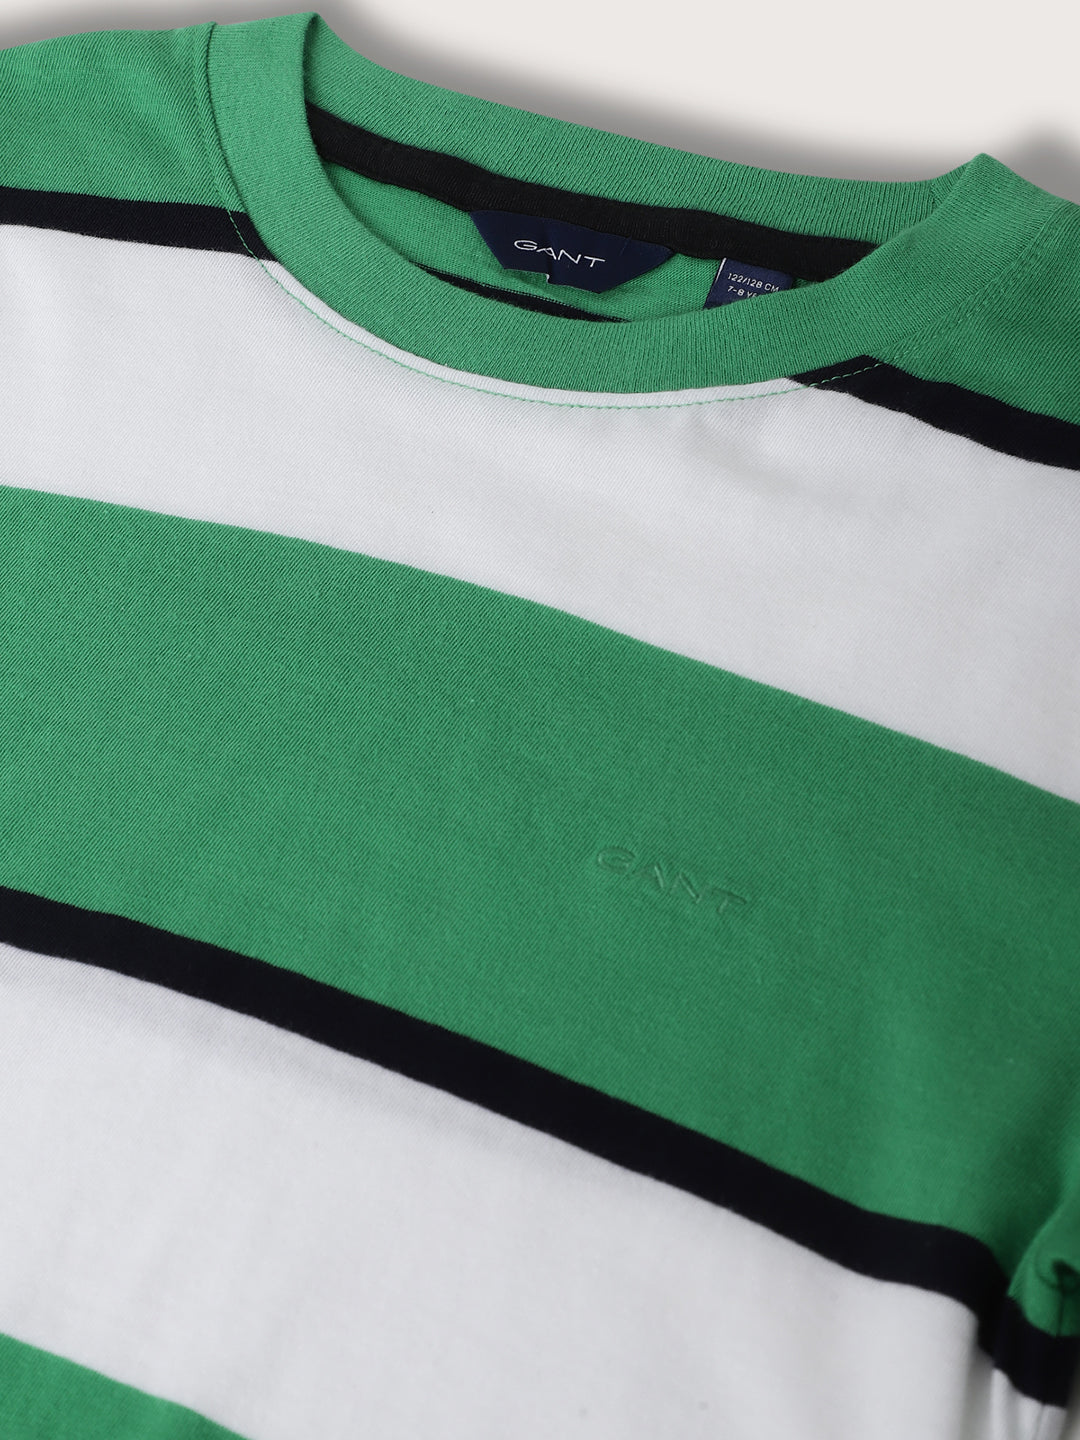 Gant Kids Green Striped Relaxed Fit T-Shirt